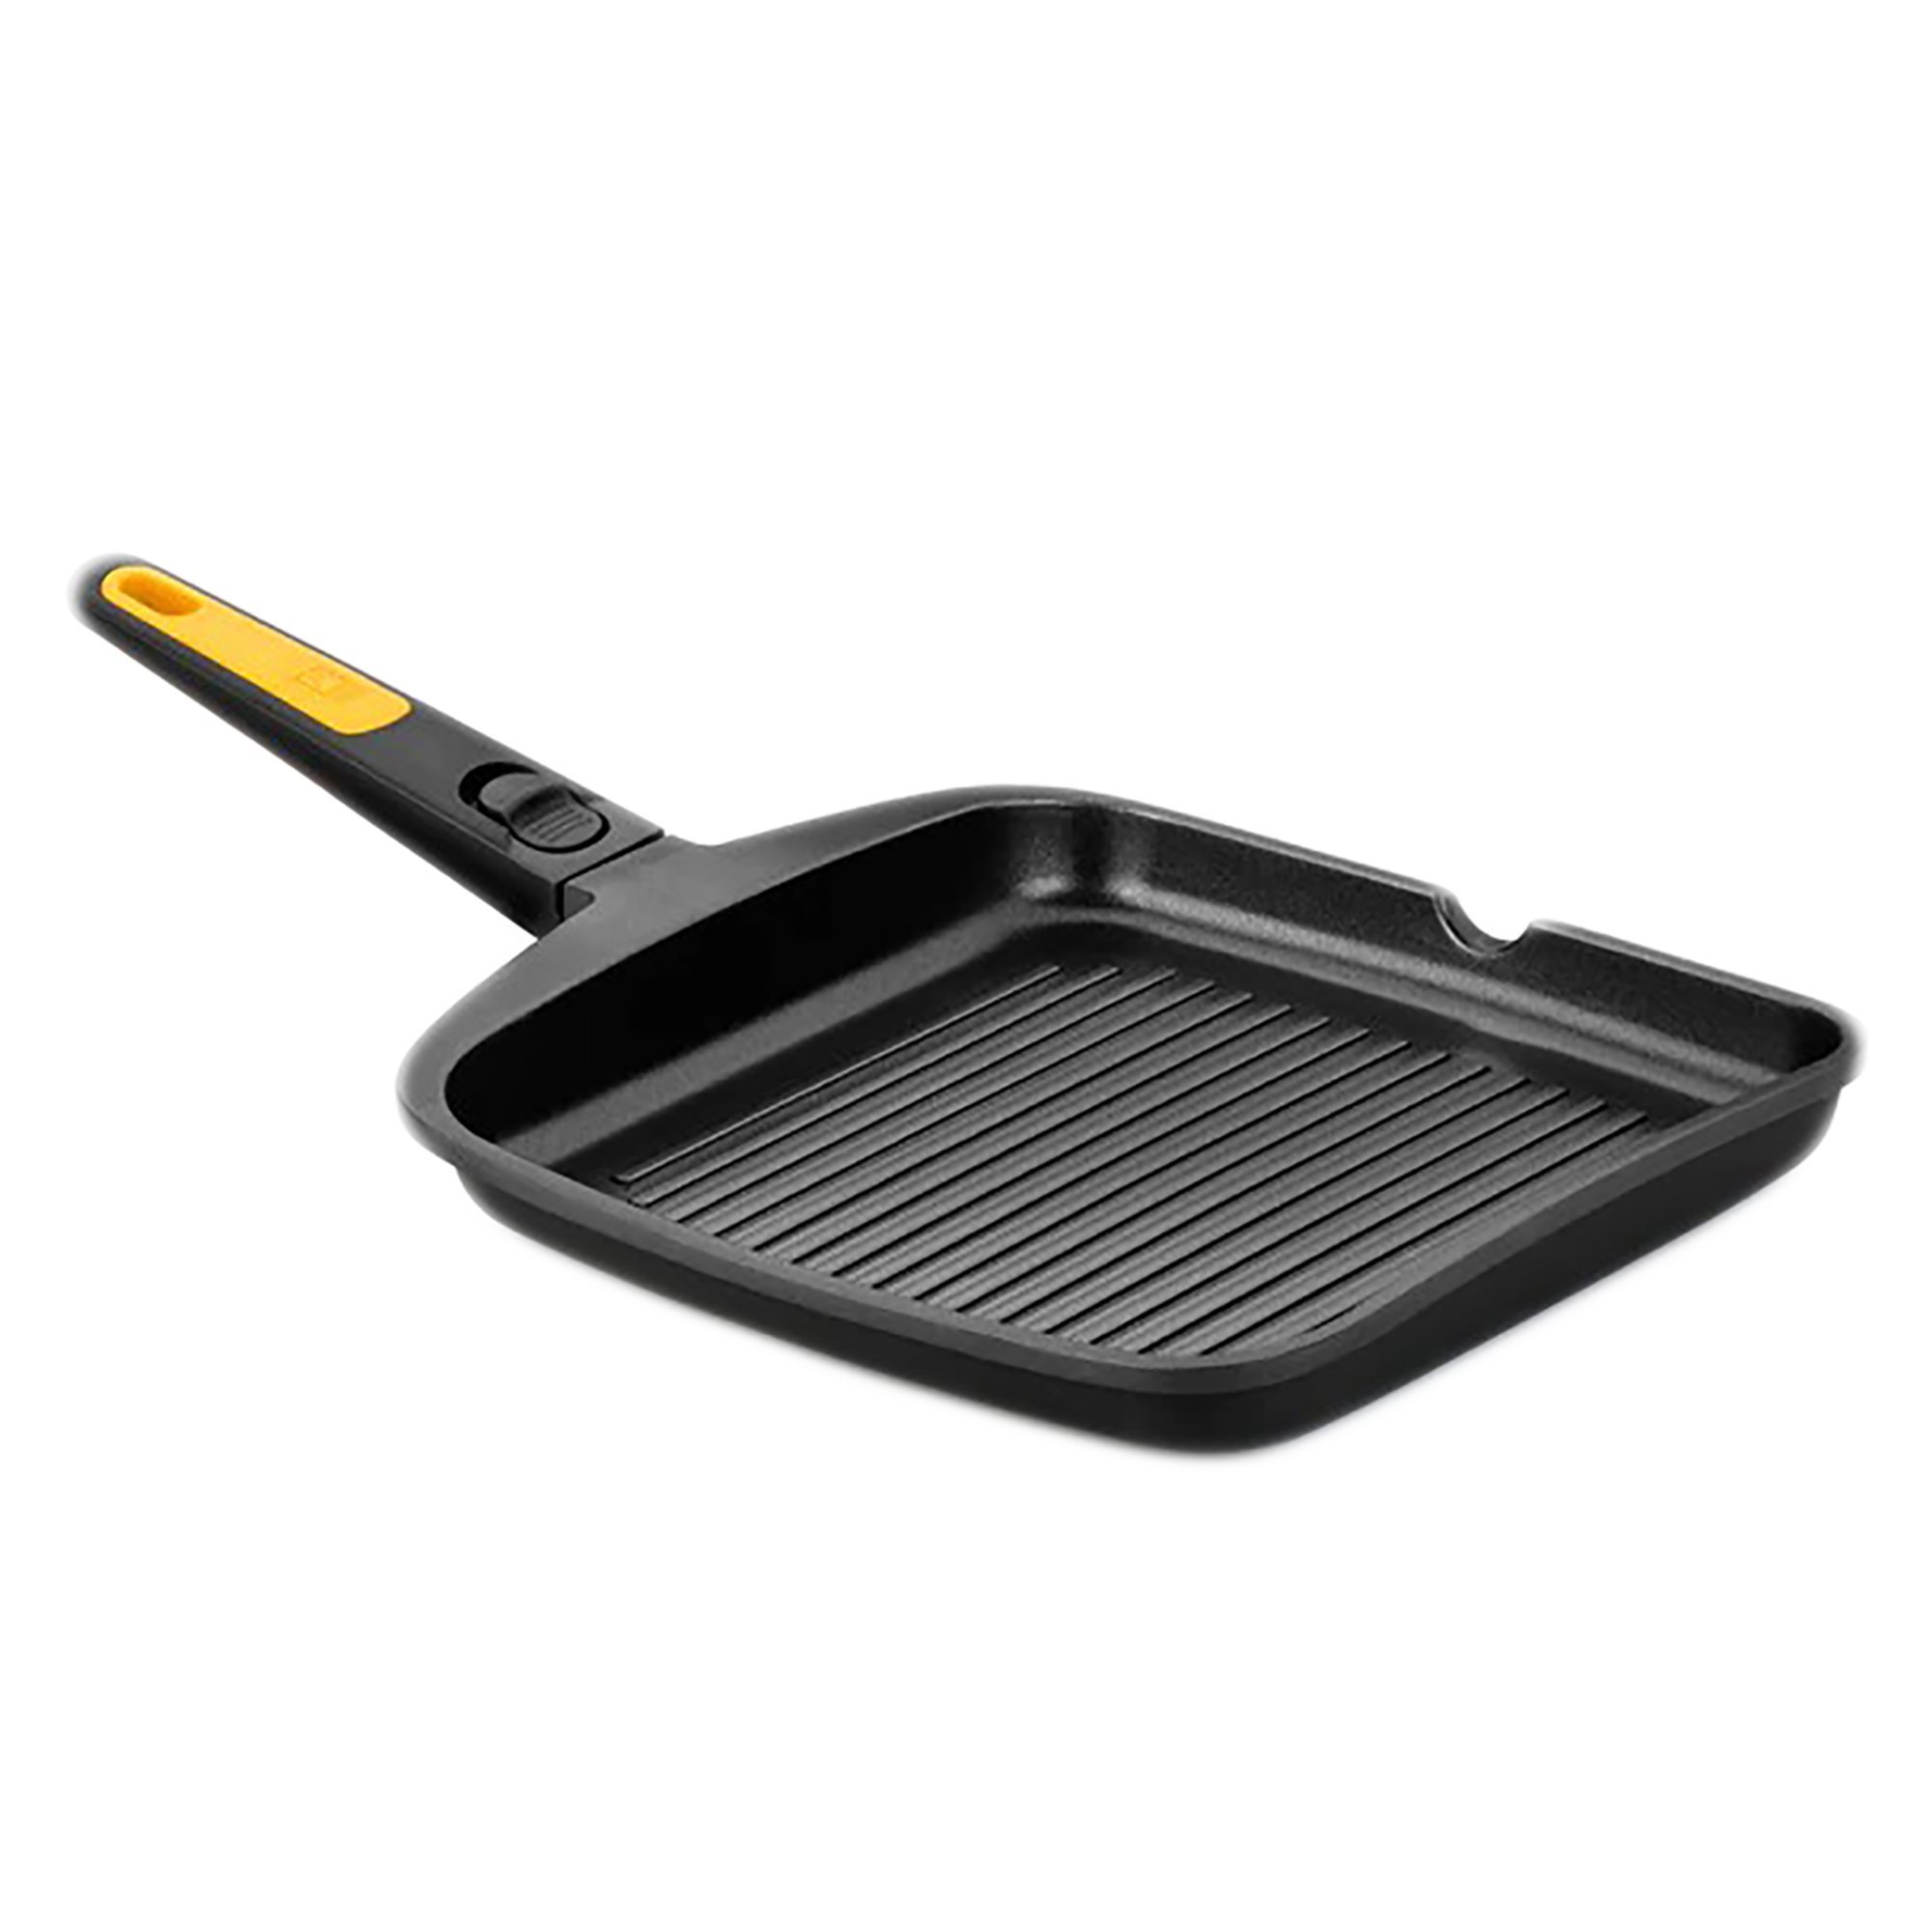  KitchenCraft Cast Iron Griddle Pan for Induction Hob, Square,  23cm: Home & Kitchen